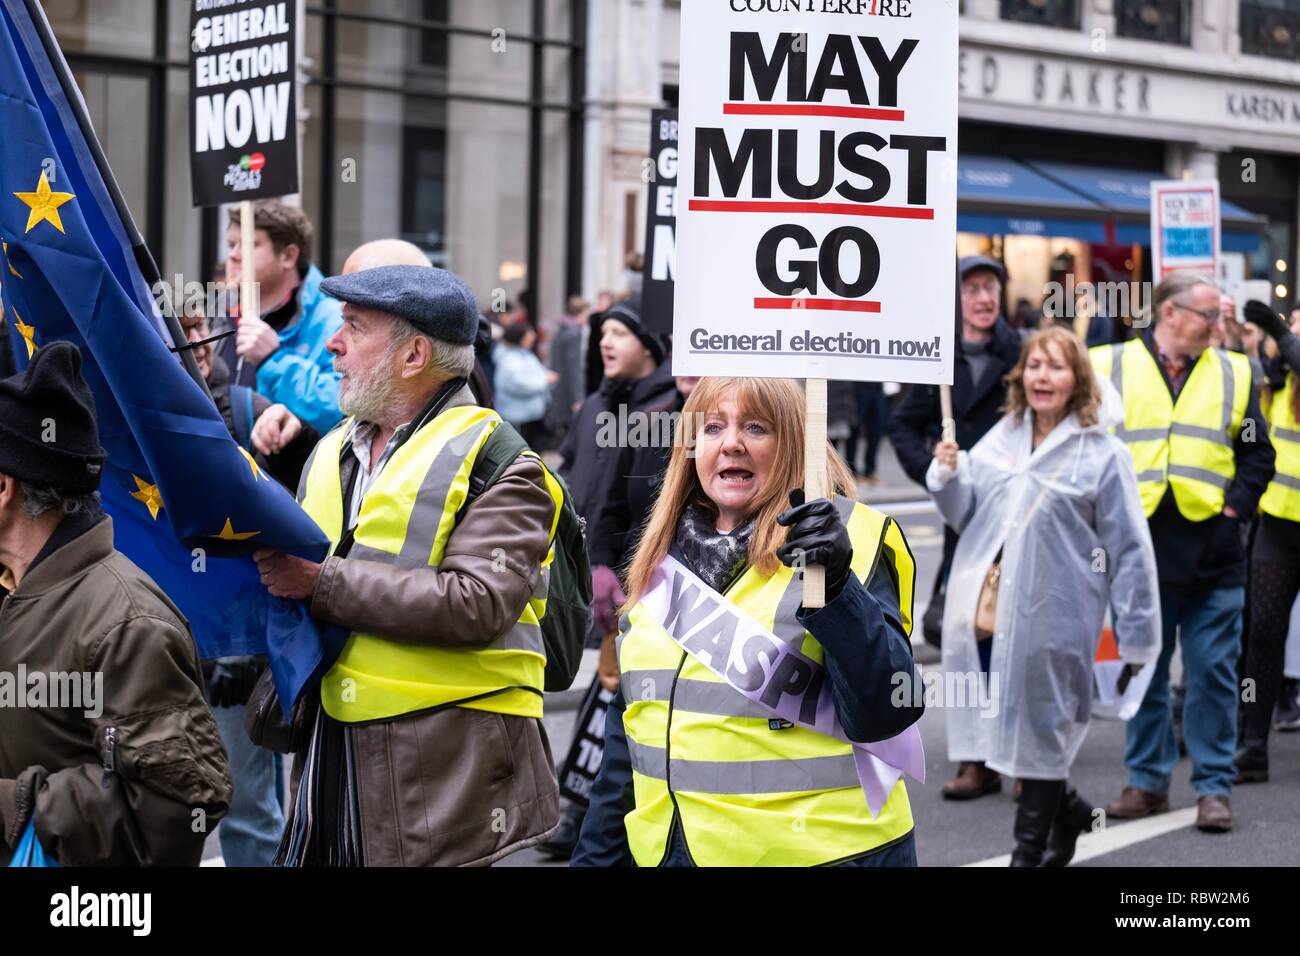 London, UK. 12th January 2019. Thousands have march in London on Saturday January 12, 2019 to protest against the Conservative Government and to call for a General Election under the banner “General Election Now”. Credit: Christopher Middleton/Alamy Live News Stock Photo